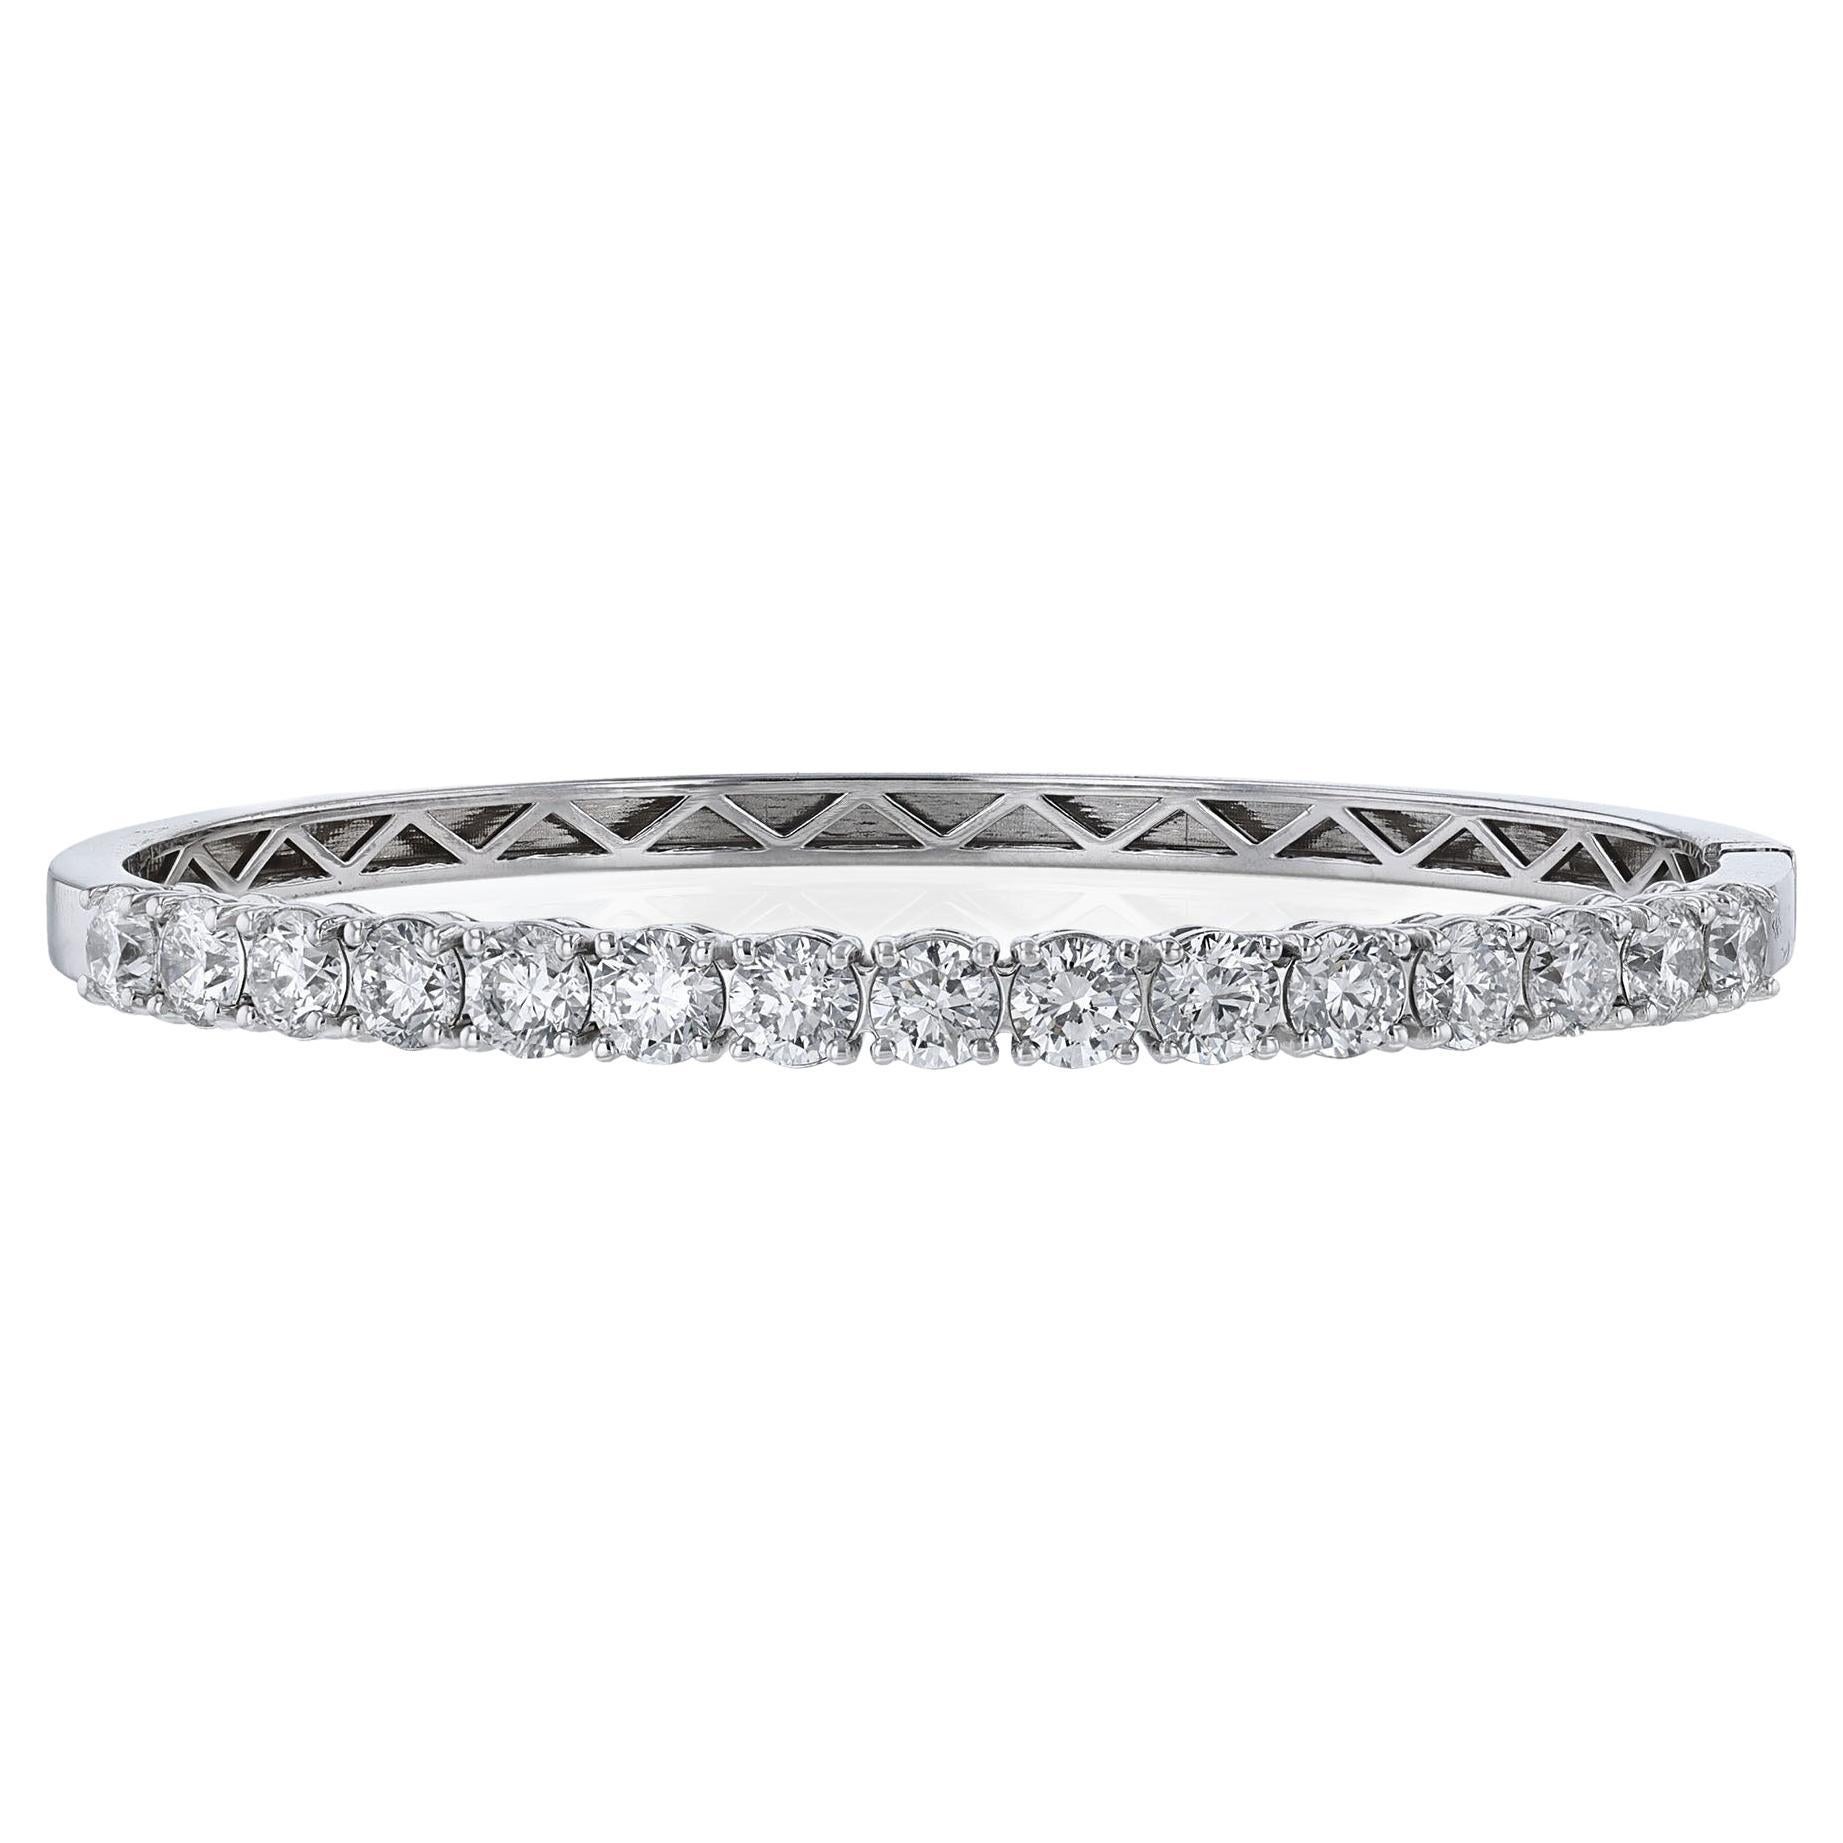 14K White Gold Round Diamond Bangle, 4.67cts. For Sale